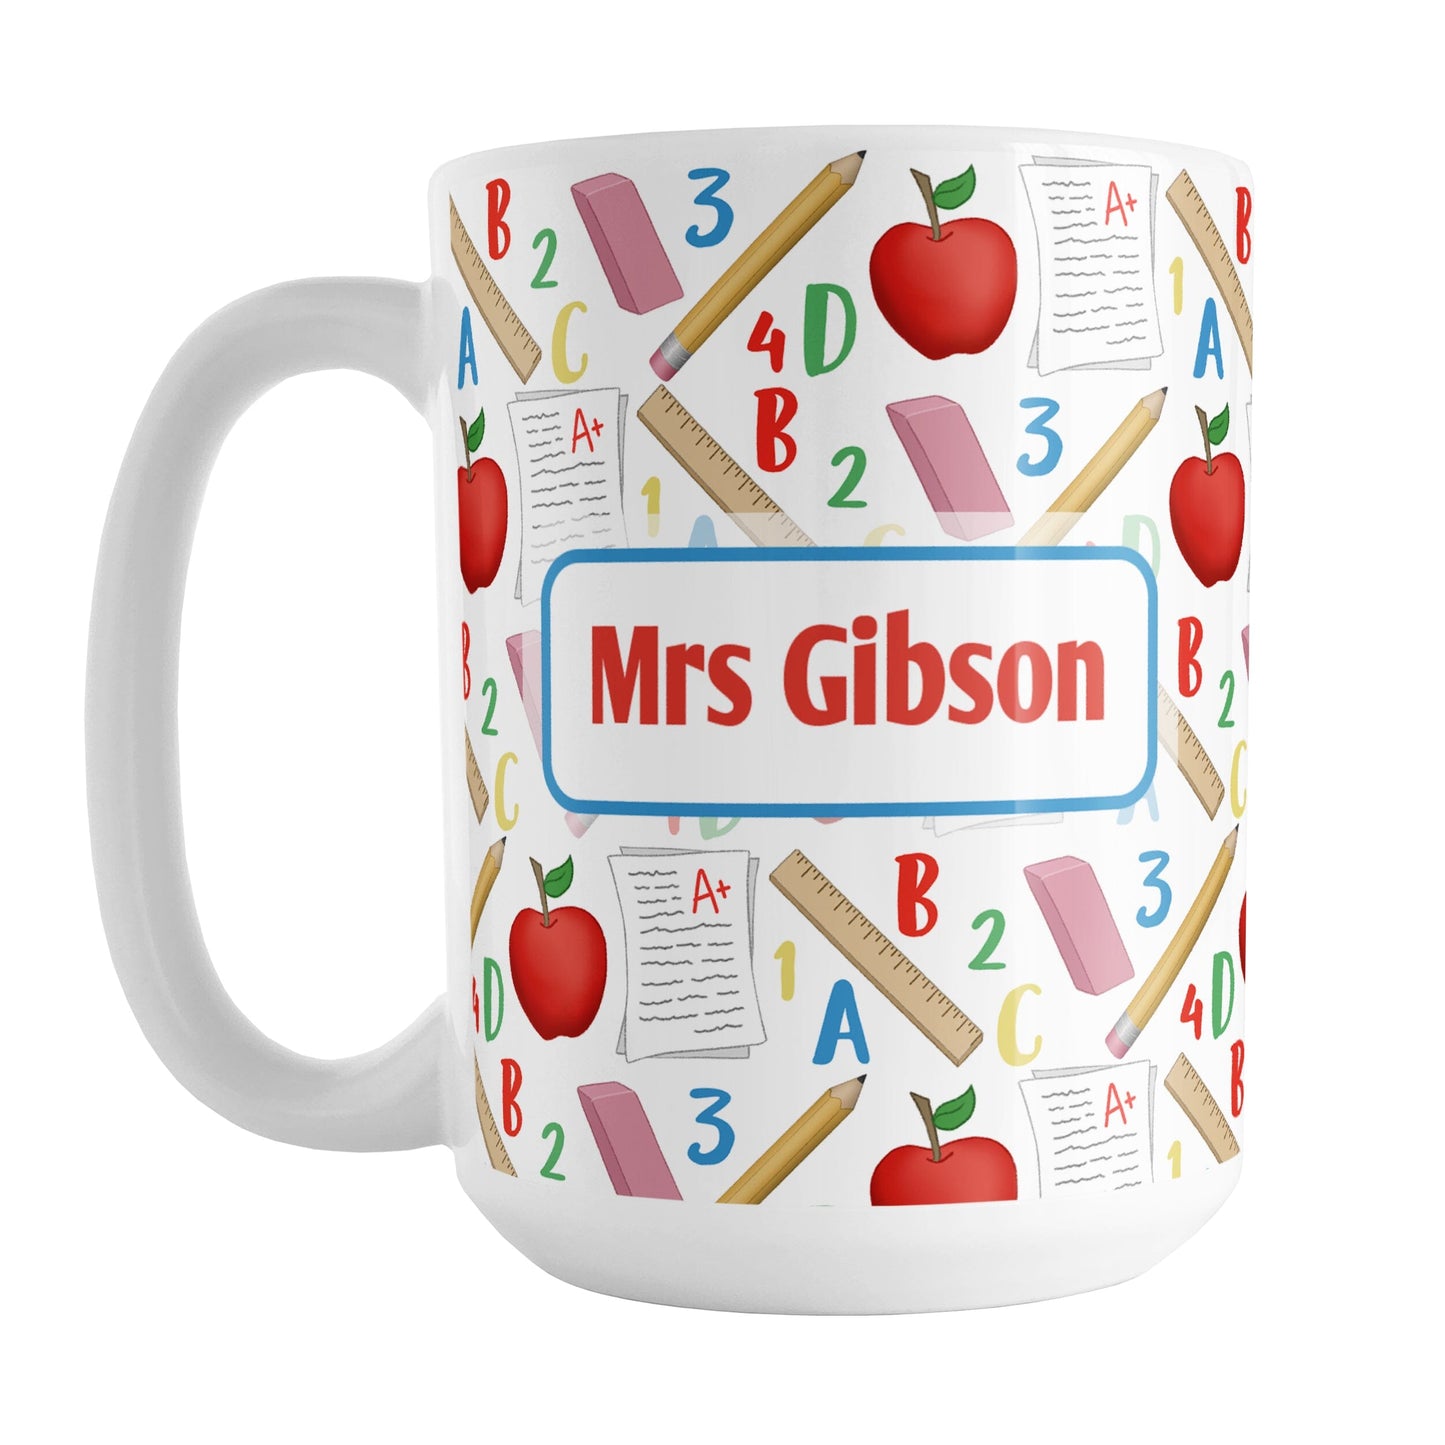 Personalized School Pattern Mug (15oz) at Amy's Coffee Mugs. A ceramic coffee mug designed with a school-themed pattern with apples, rulers, erasers, graded papers, numbers, and letters that wraps around the mug to the handle. Your personalized name or your teacher's name is custom printed on both sides of the mug over the school pattern.